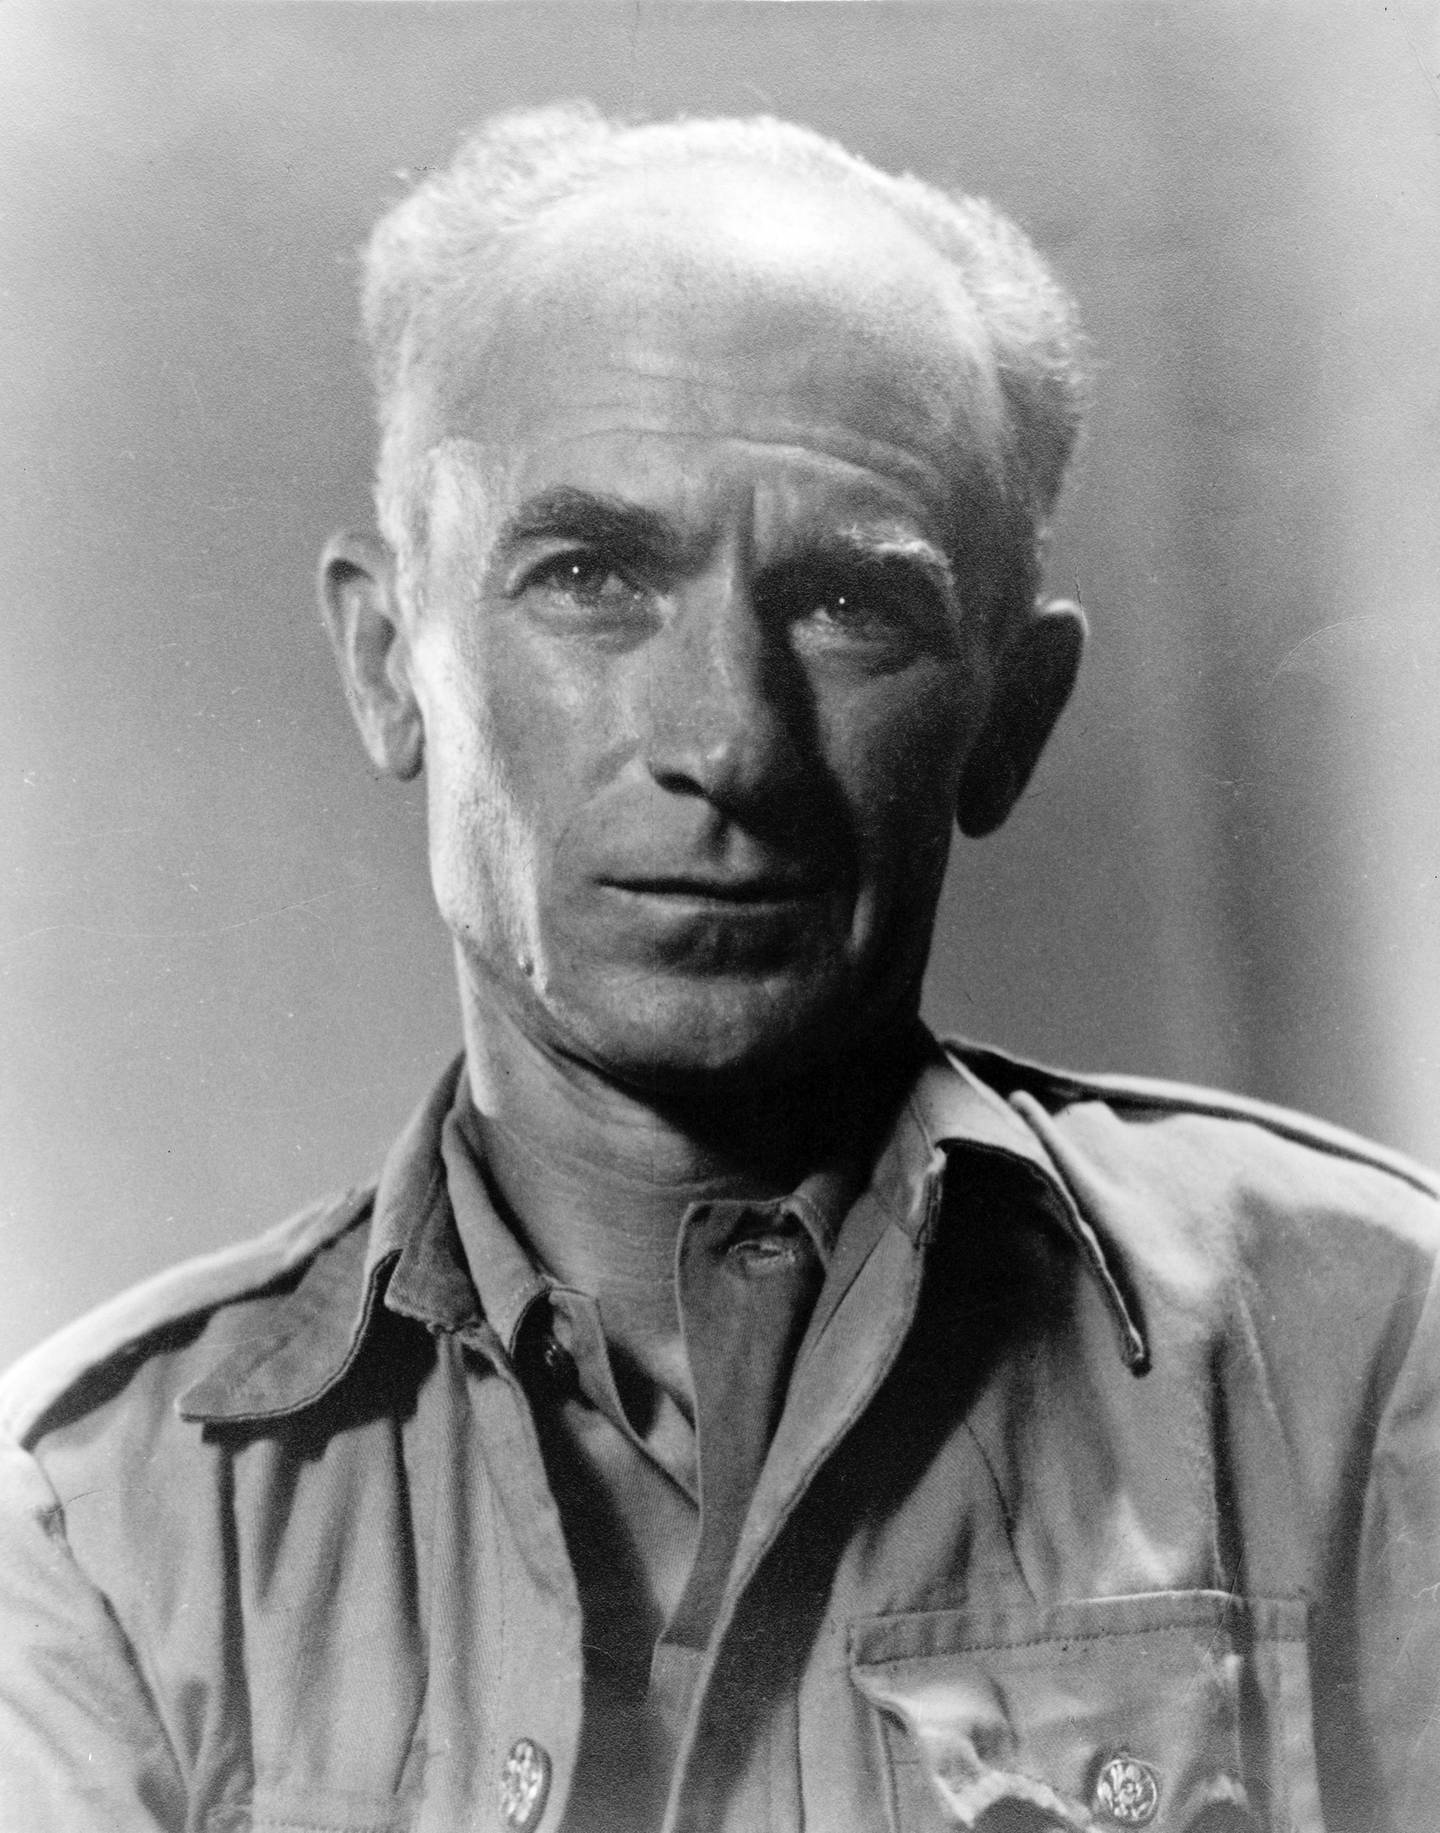 Ernie Pyle’s “everyman” approach to writing about the war won him praise among the service members he worked with in combat.